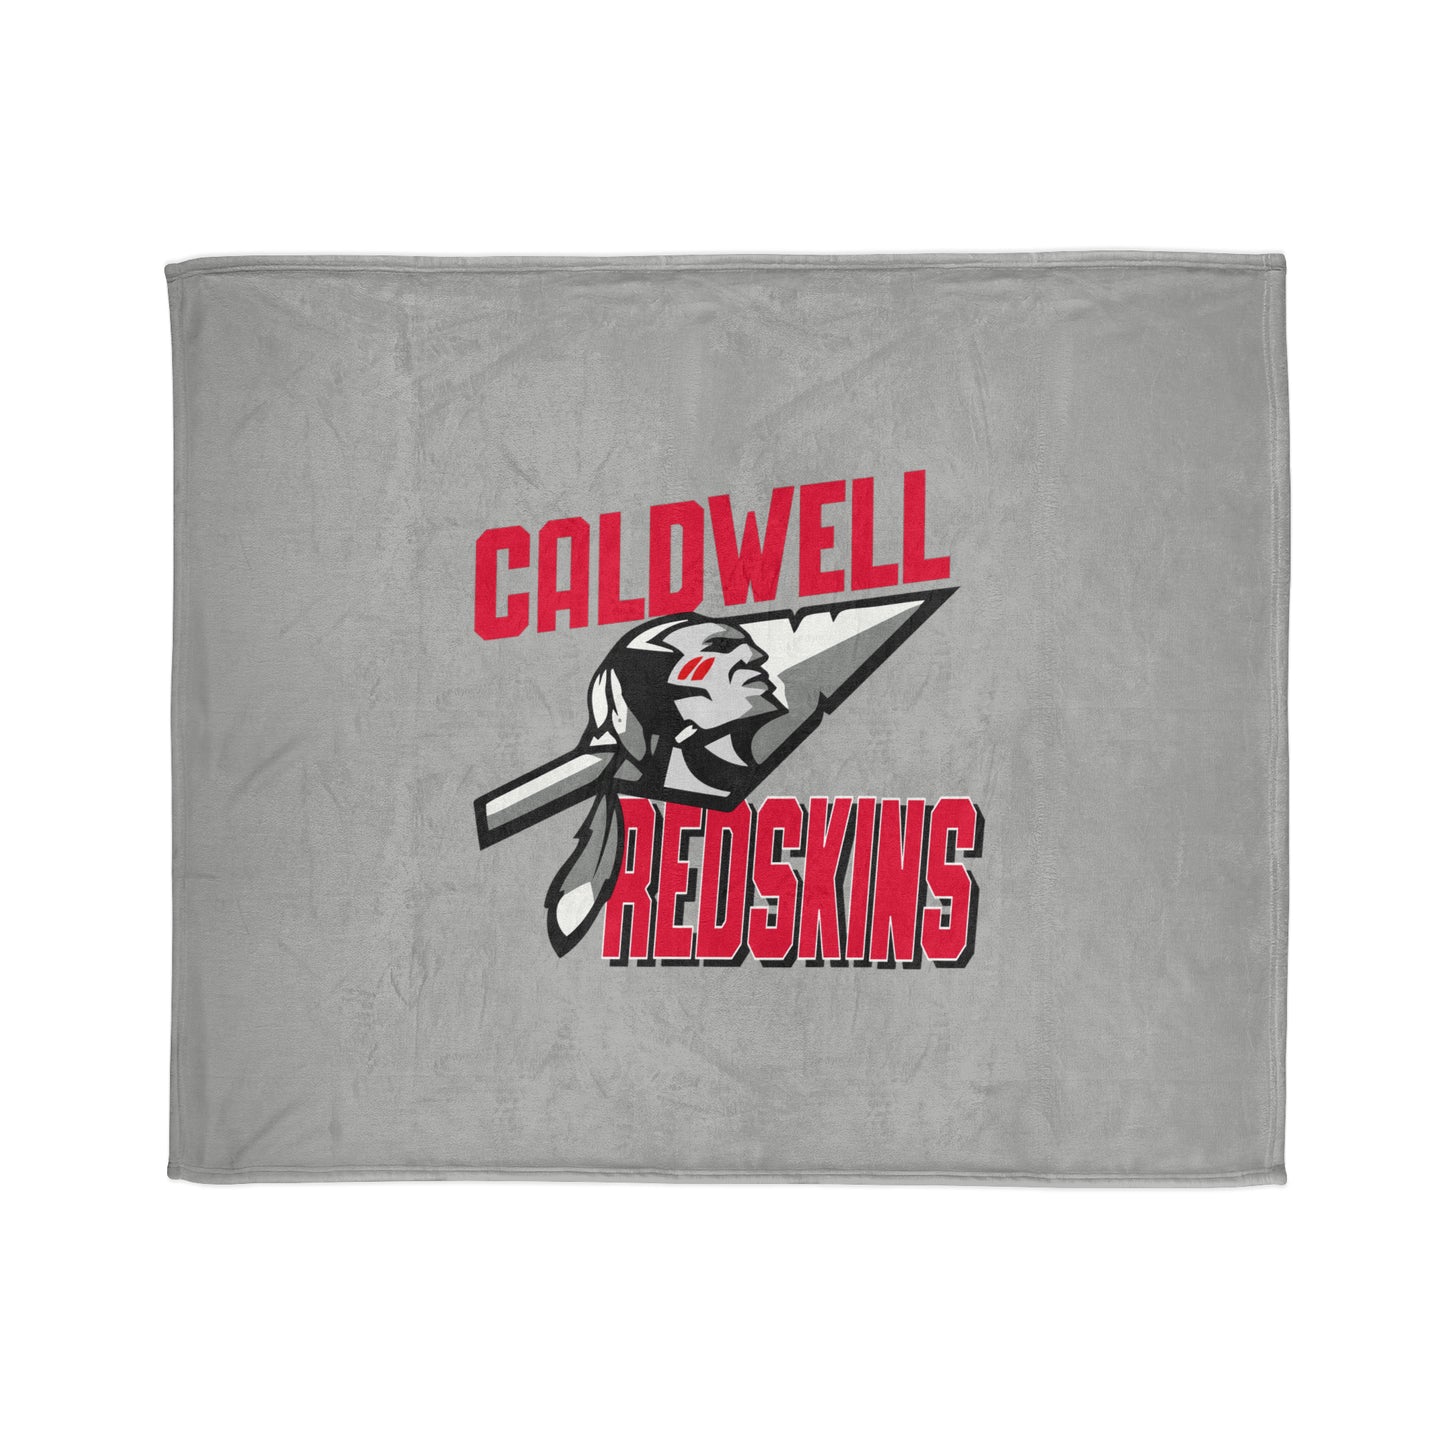 Soft Polyester Blanket - Caldwell 2